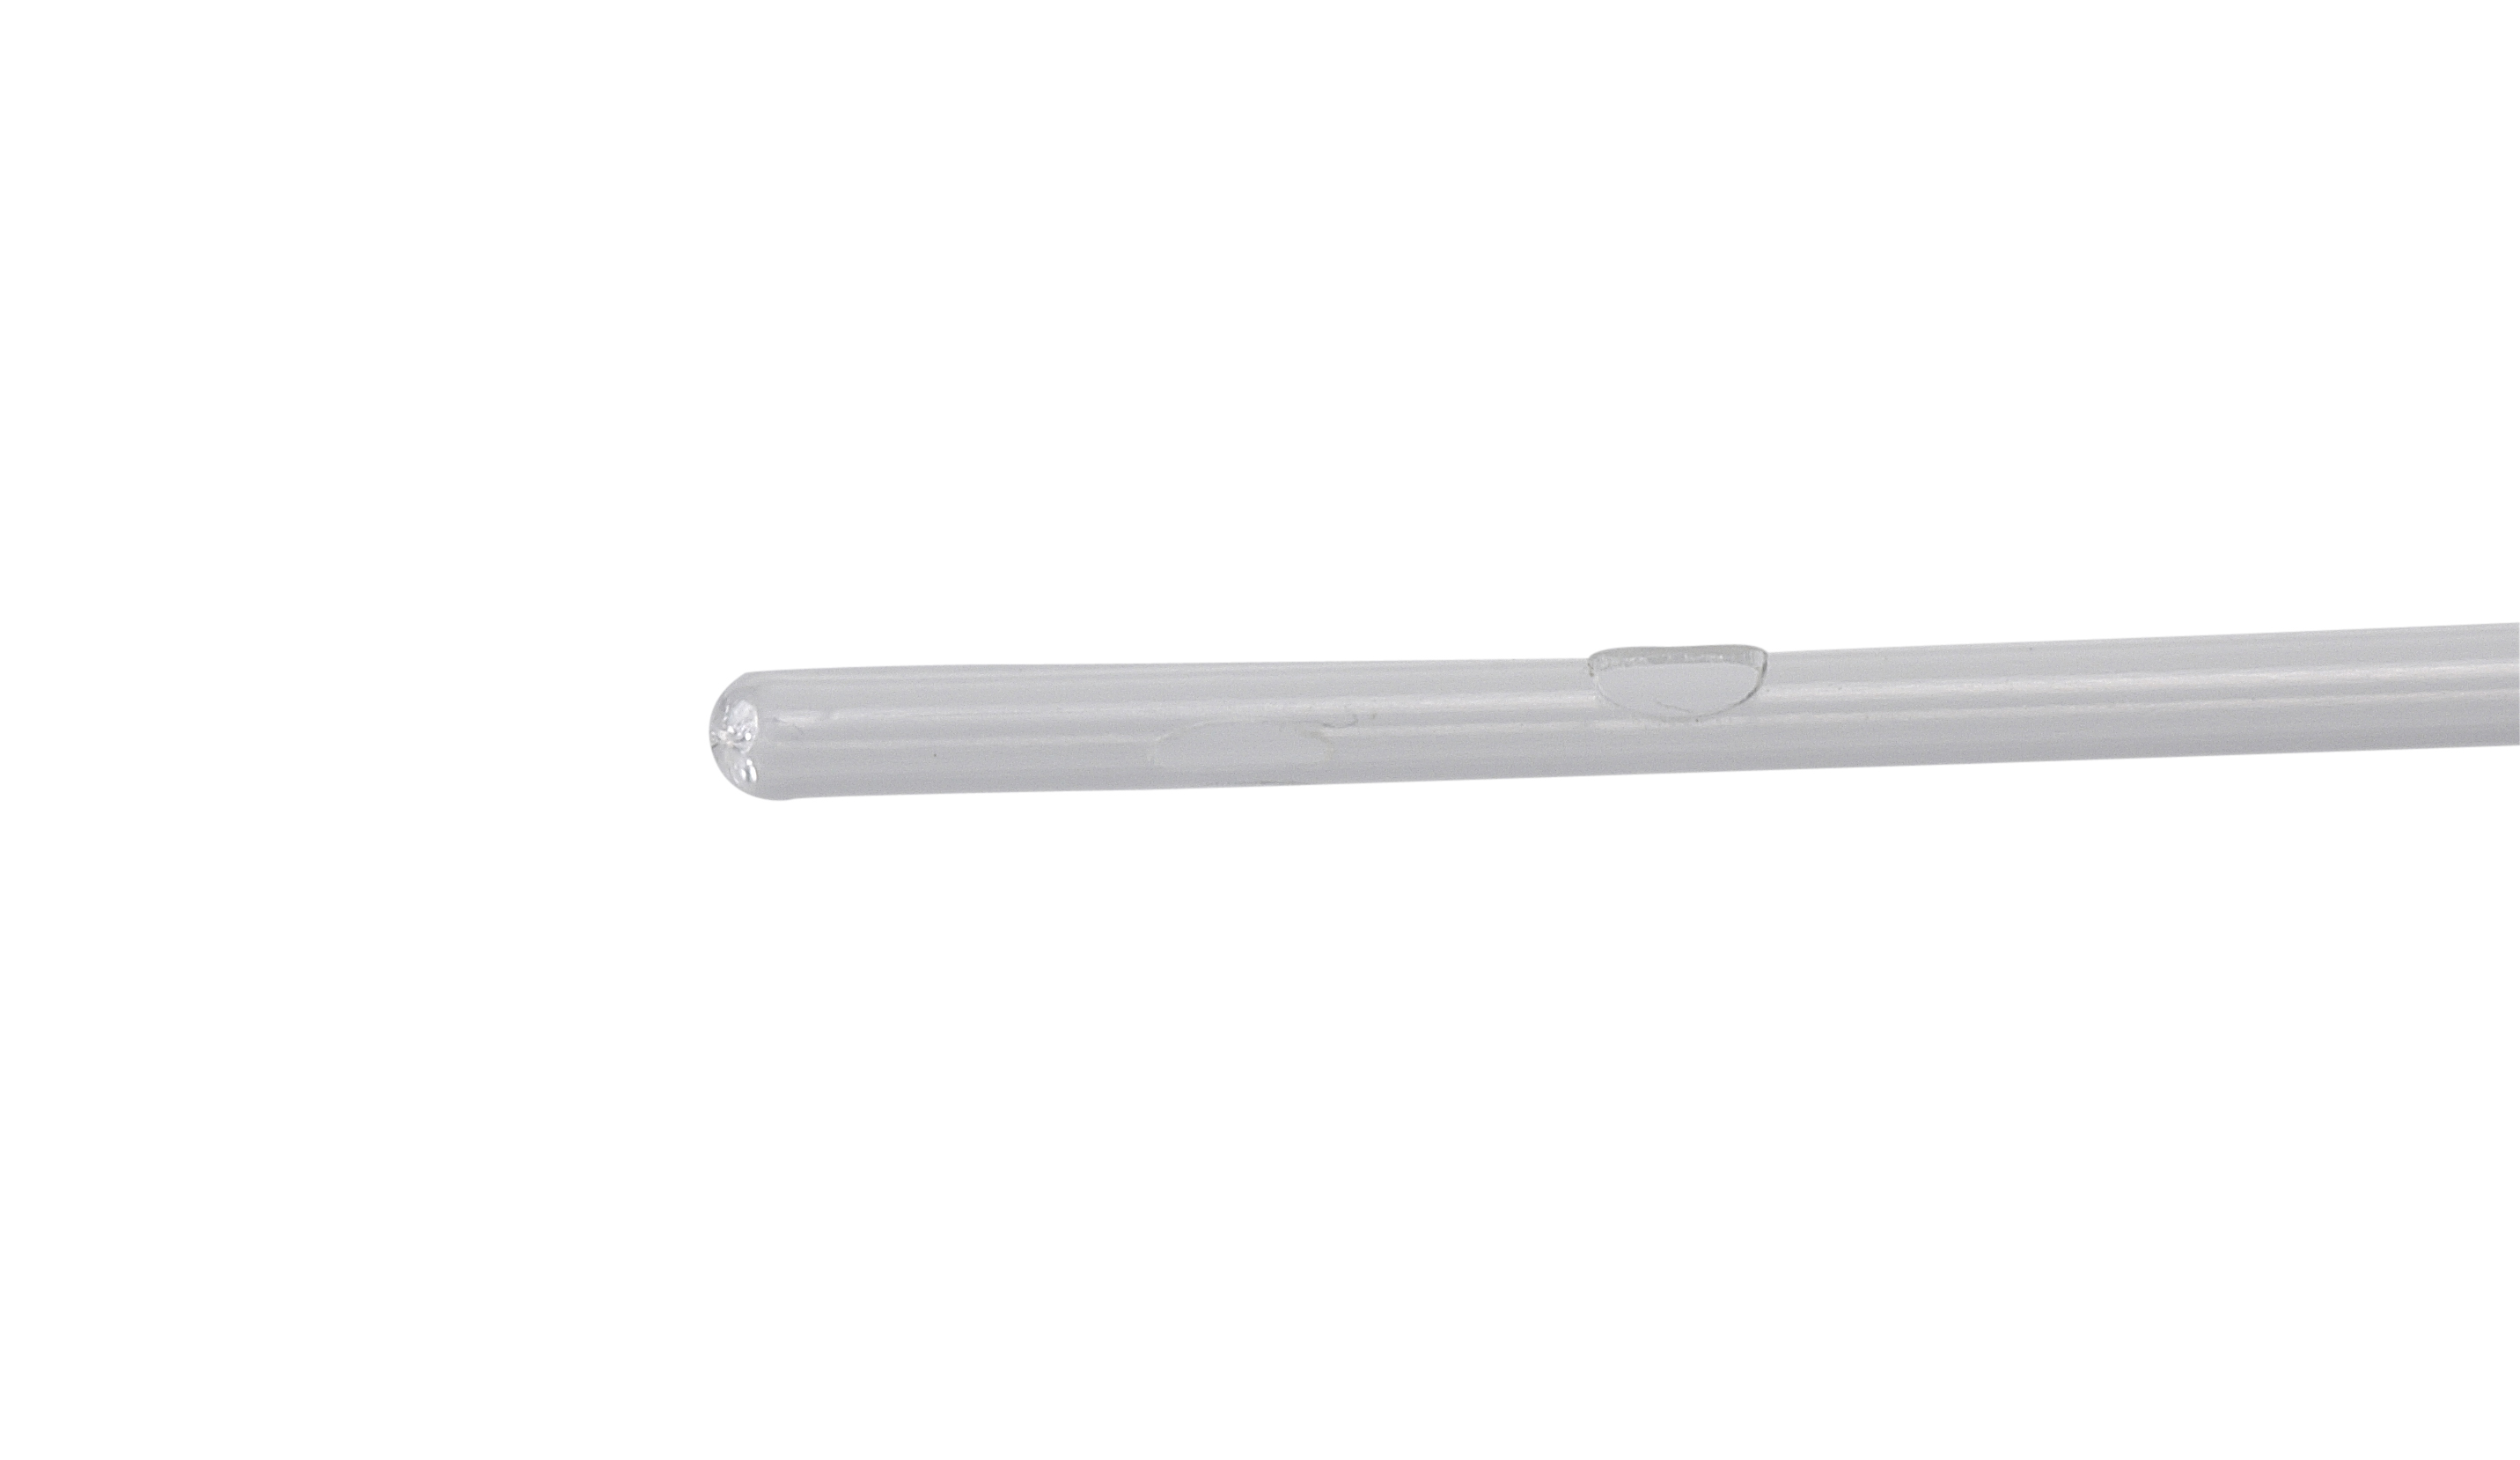 BUSTER Cat Catheter, 4 Fr x 6.3”, 1.3 x 160 mm, side holes, without stylet, sterile, 12/pk
